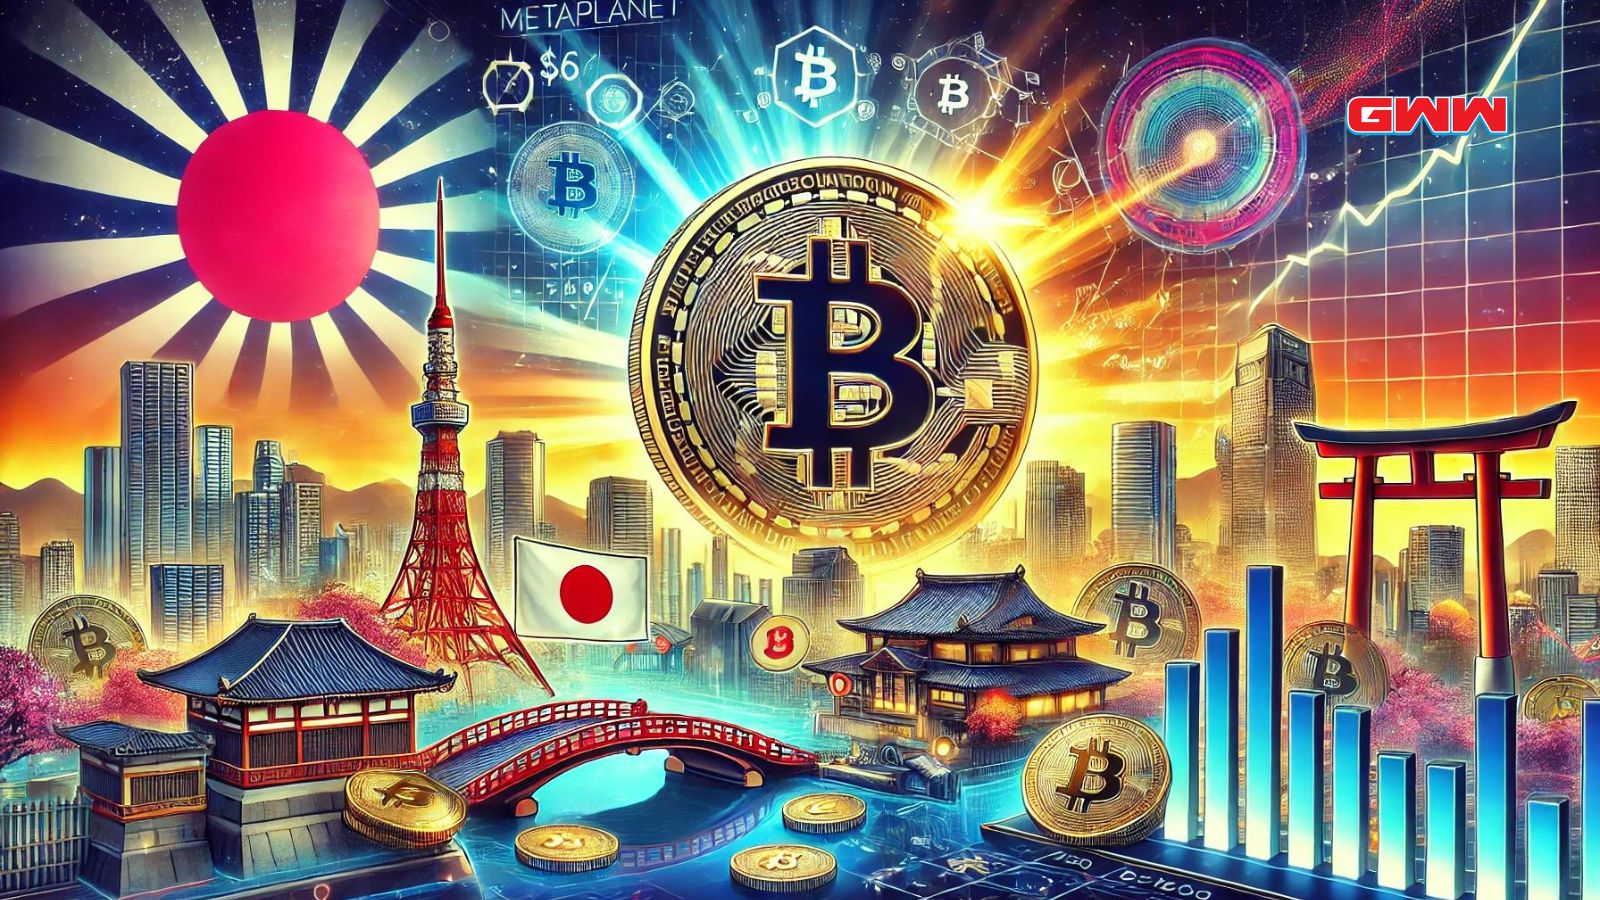 A vibrant scene depicting Japan's Metaplanet planning to buy another $6M worth of Bitcoin